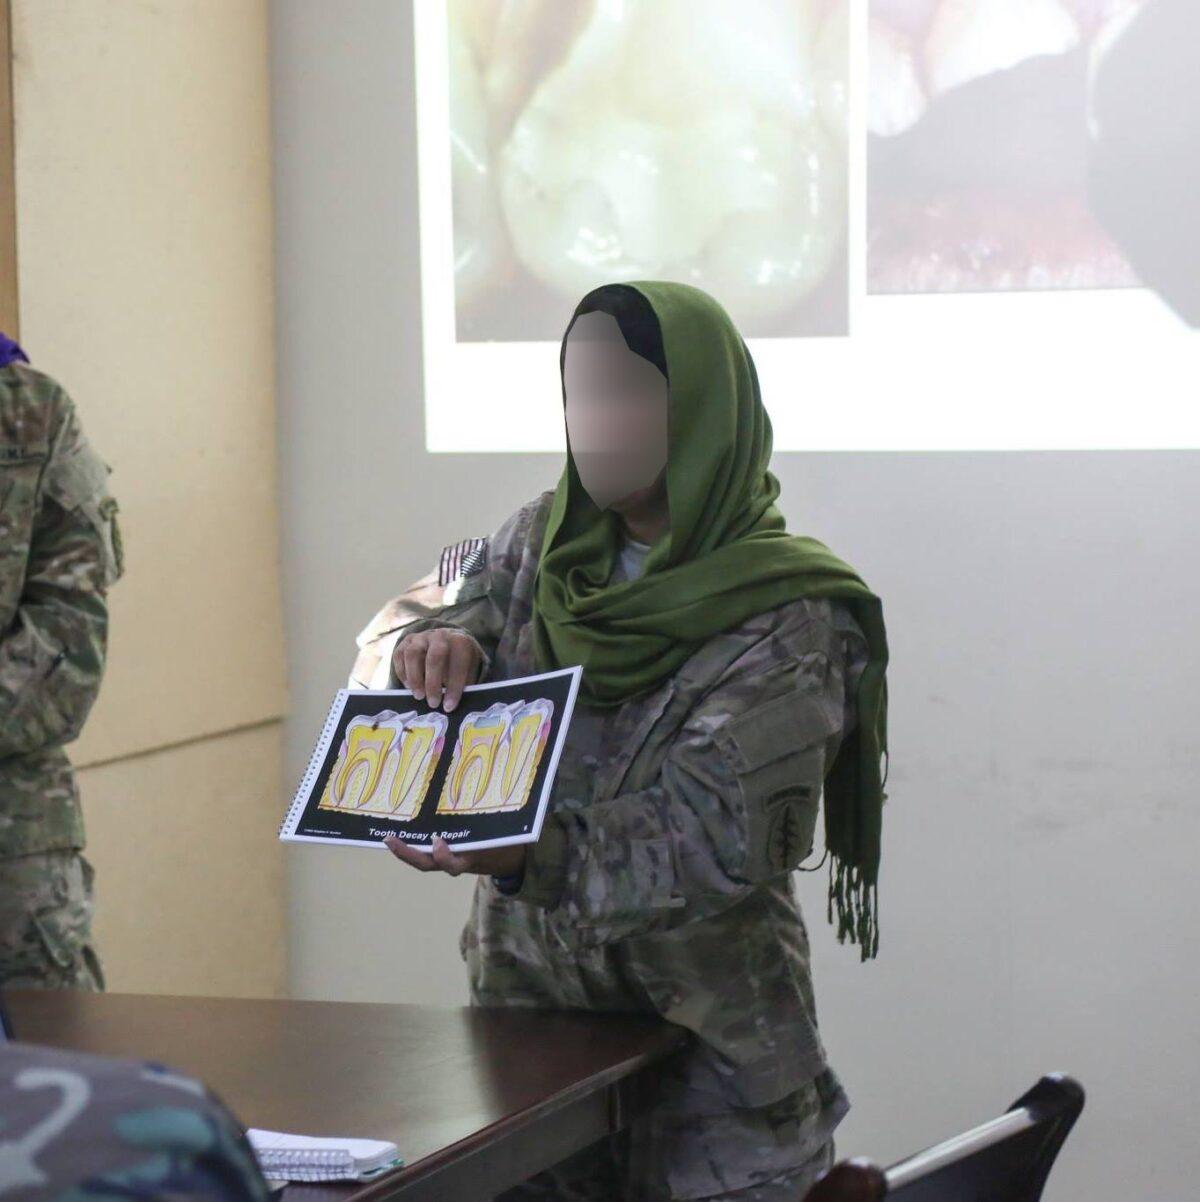 Interpreter at work in Afghanistan, with face blurred to protect her identity. (Courtesy of the interpreter)